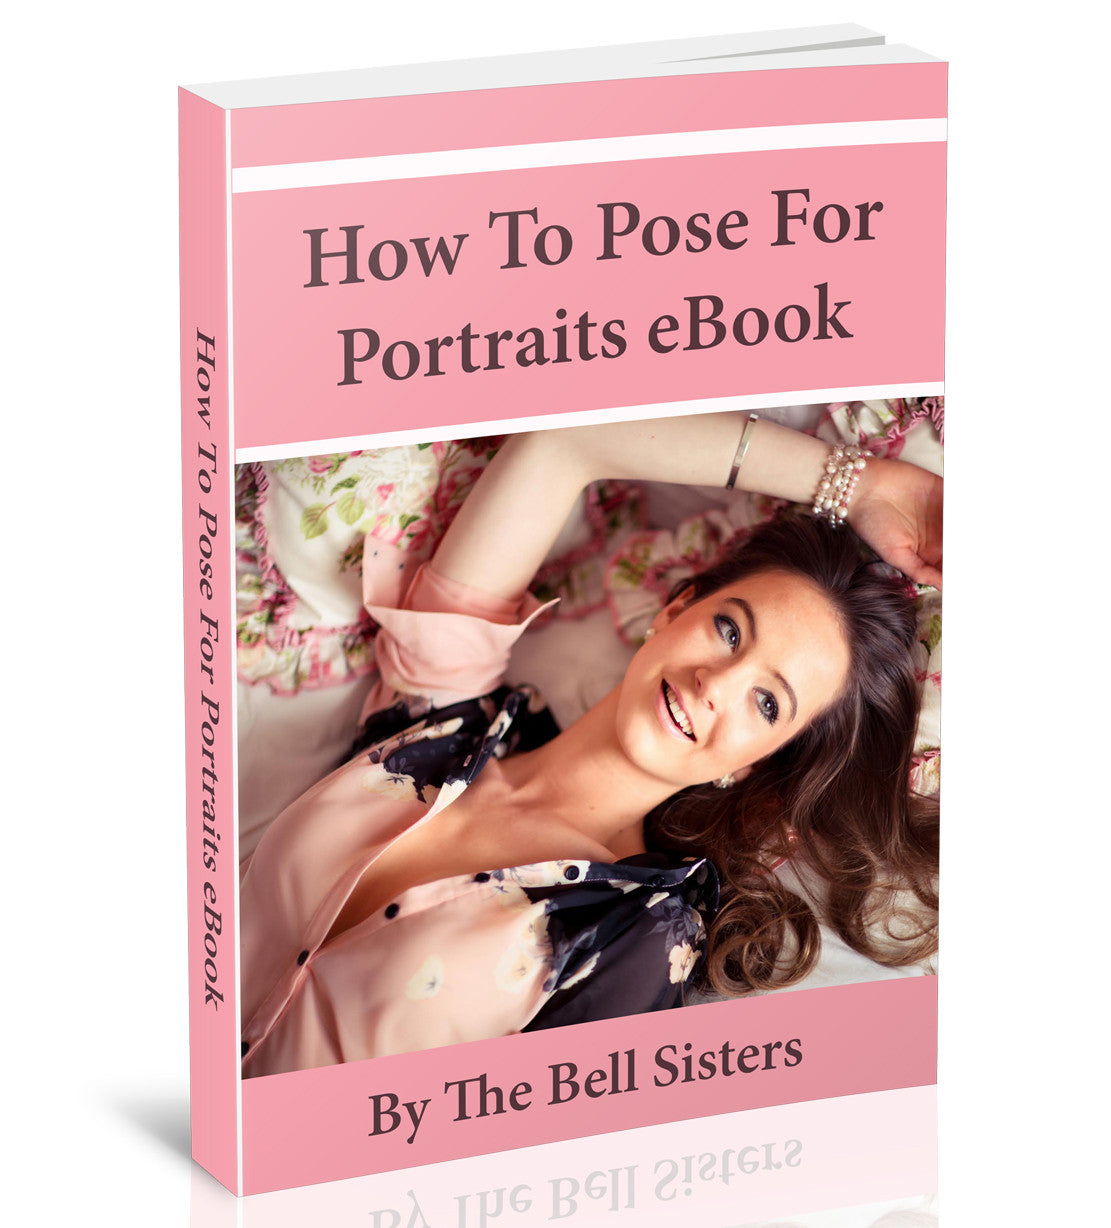 How To Pose For Portraits eBook